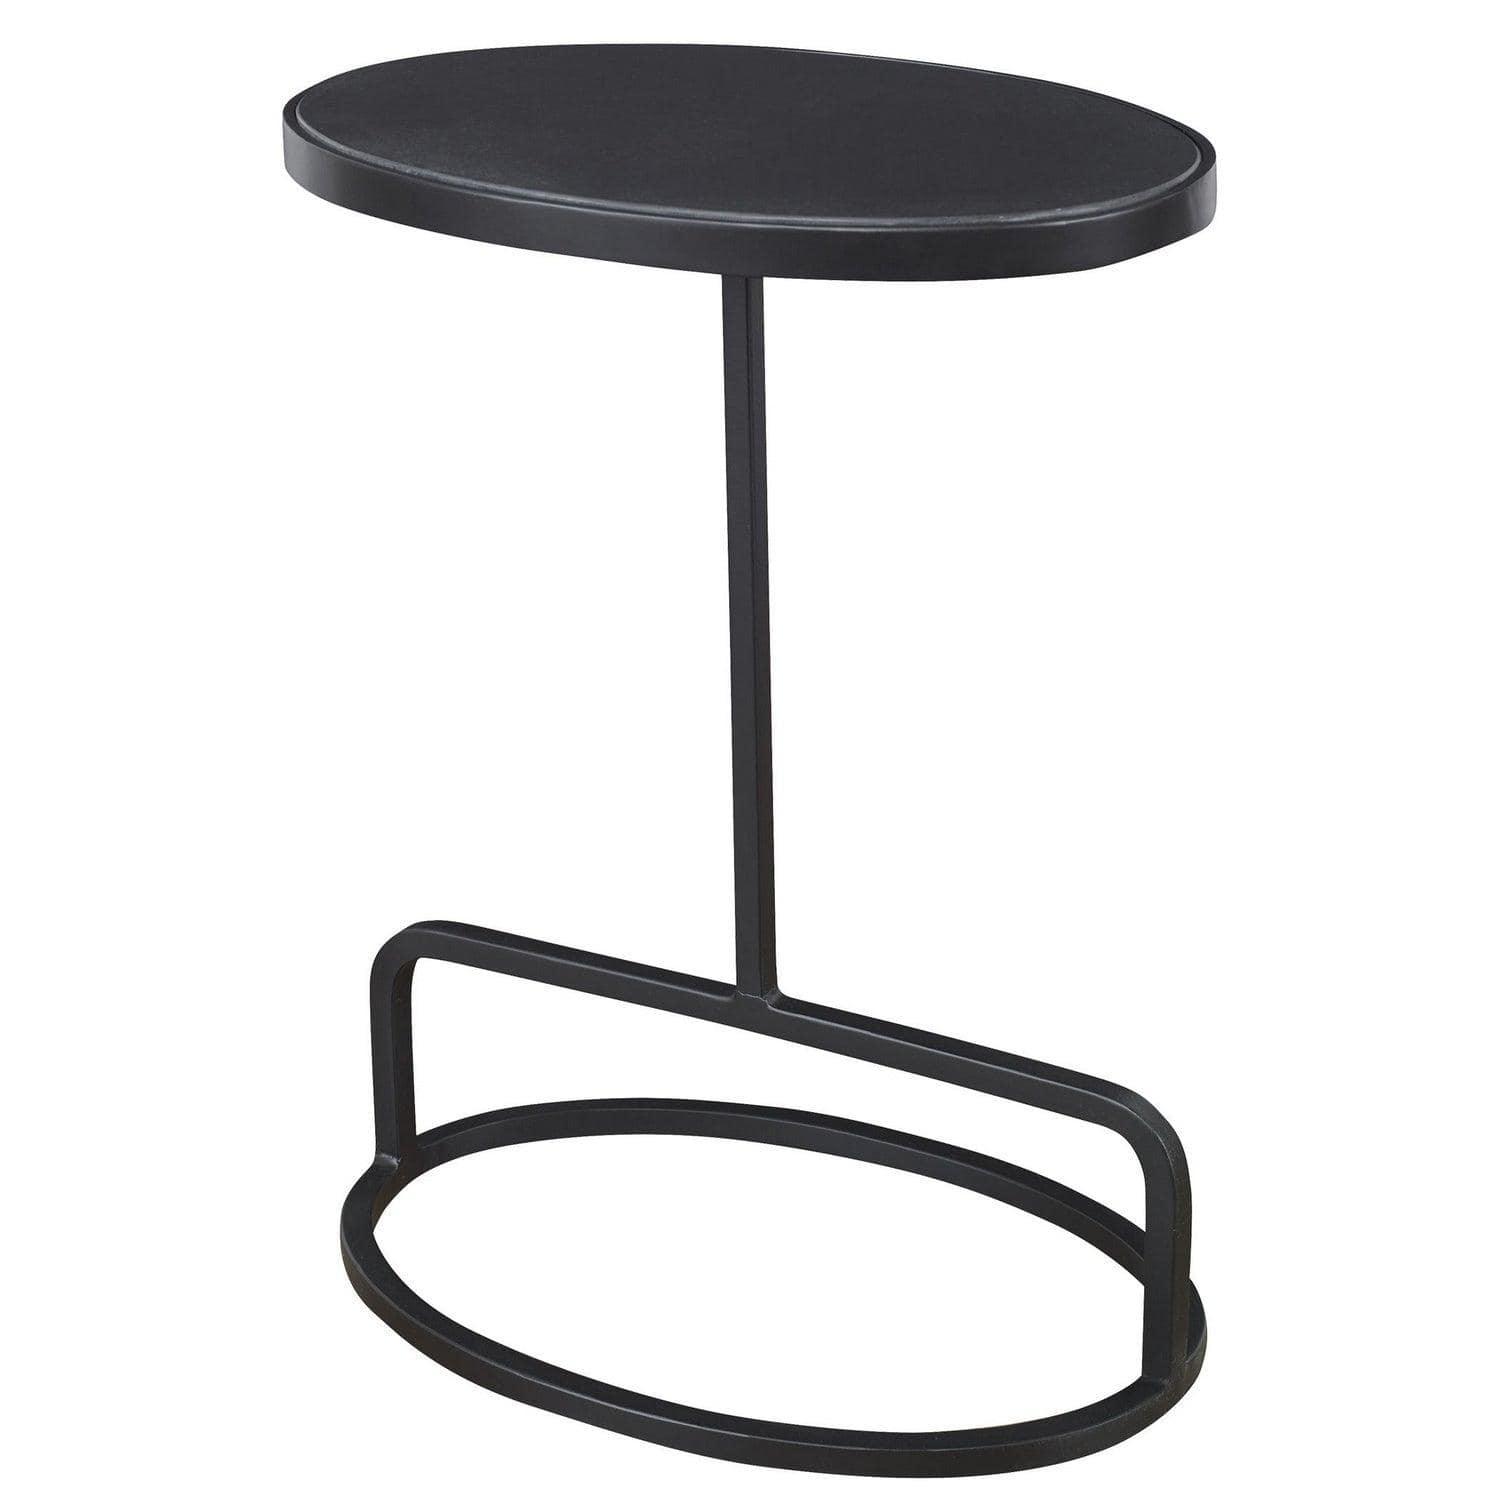 The Uttermost - Jessenia Accent Table - 25207 | Montreal Lighting & Hardware